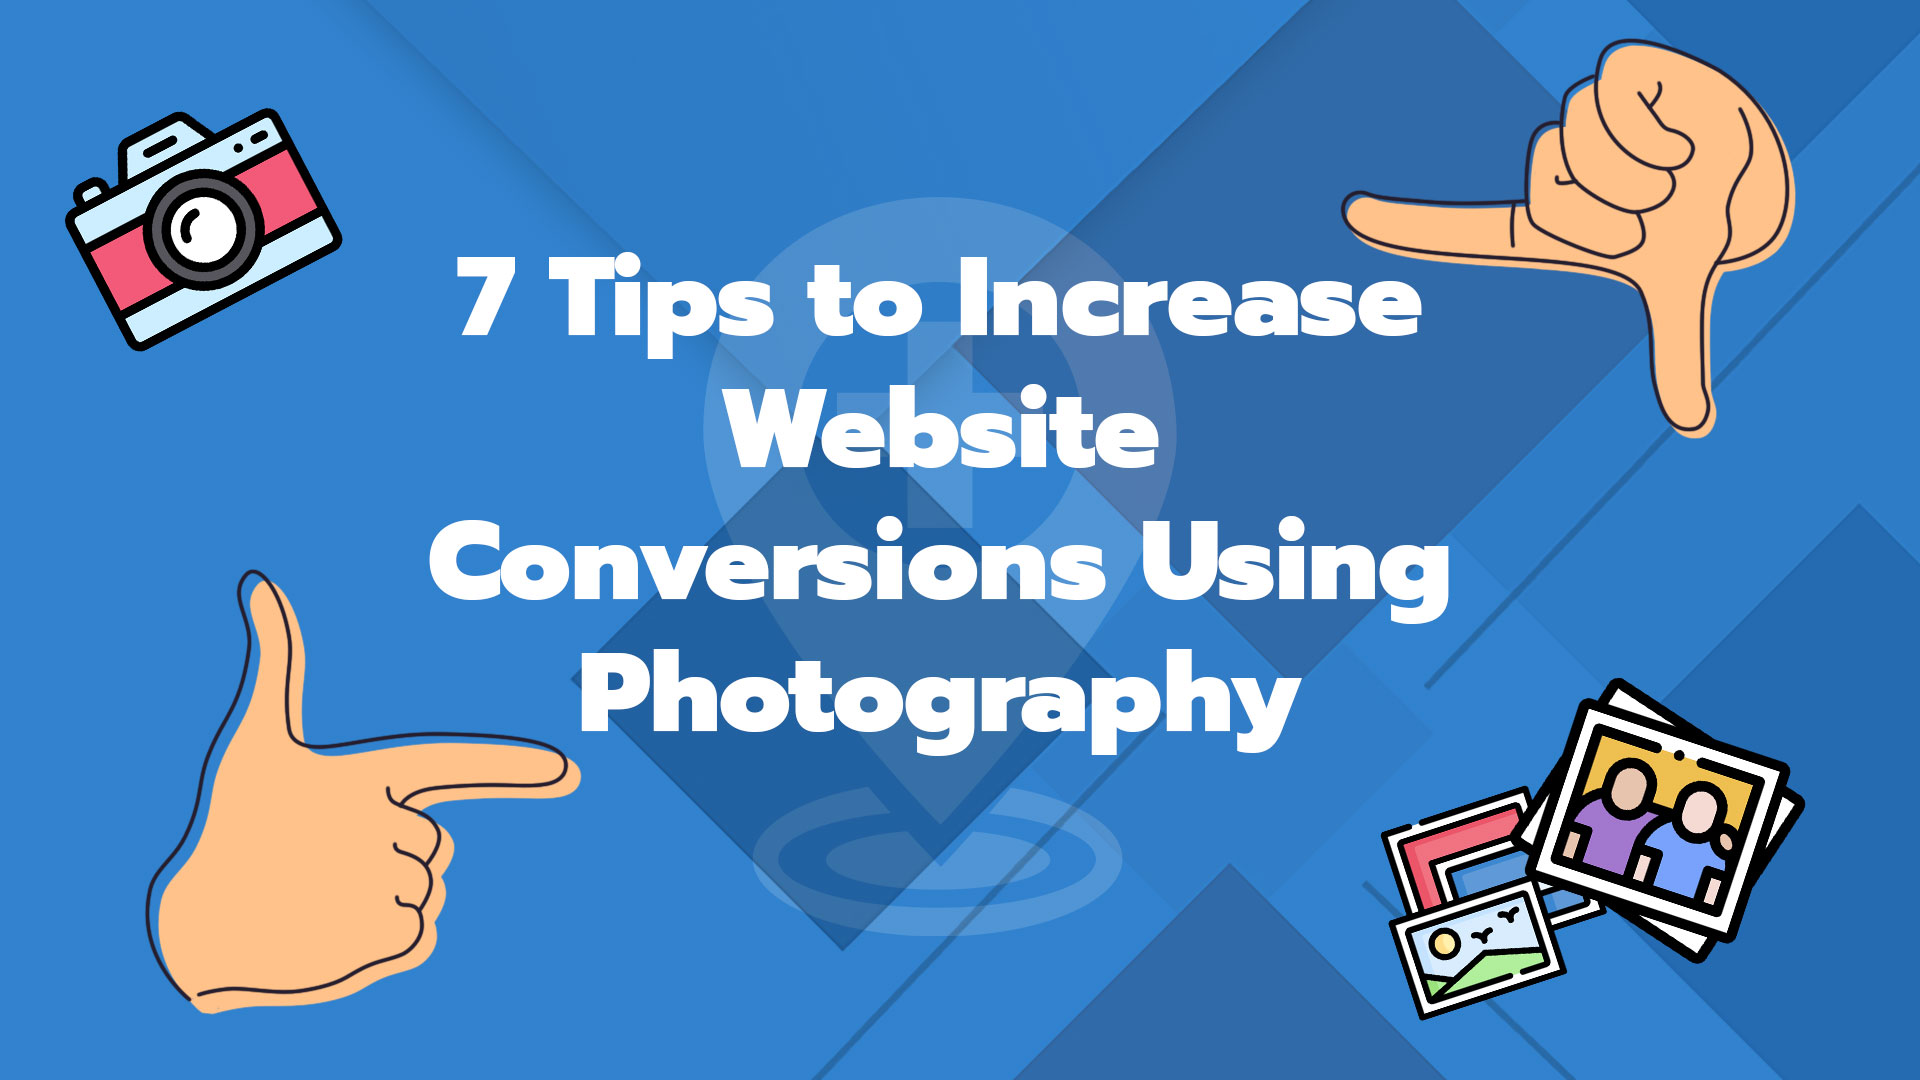 Using Photography to Increase Website Conversions: 7 Tips